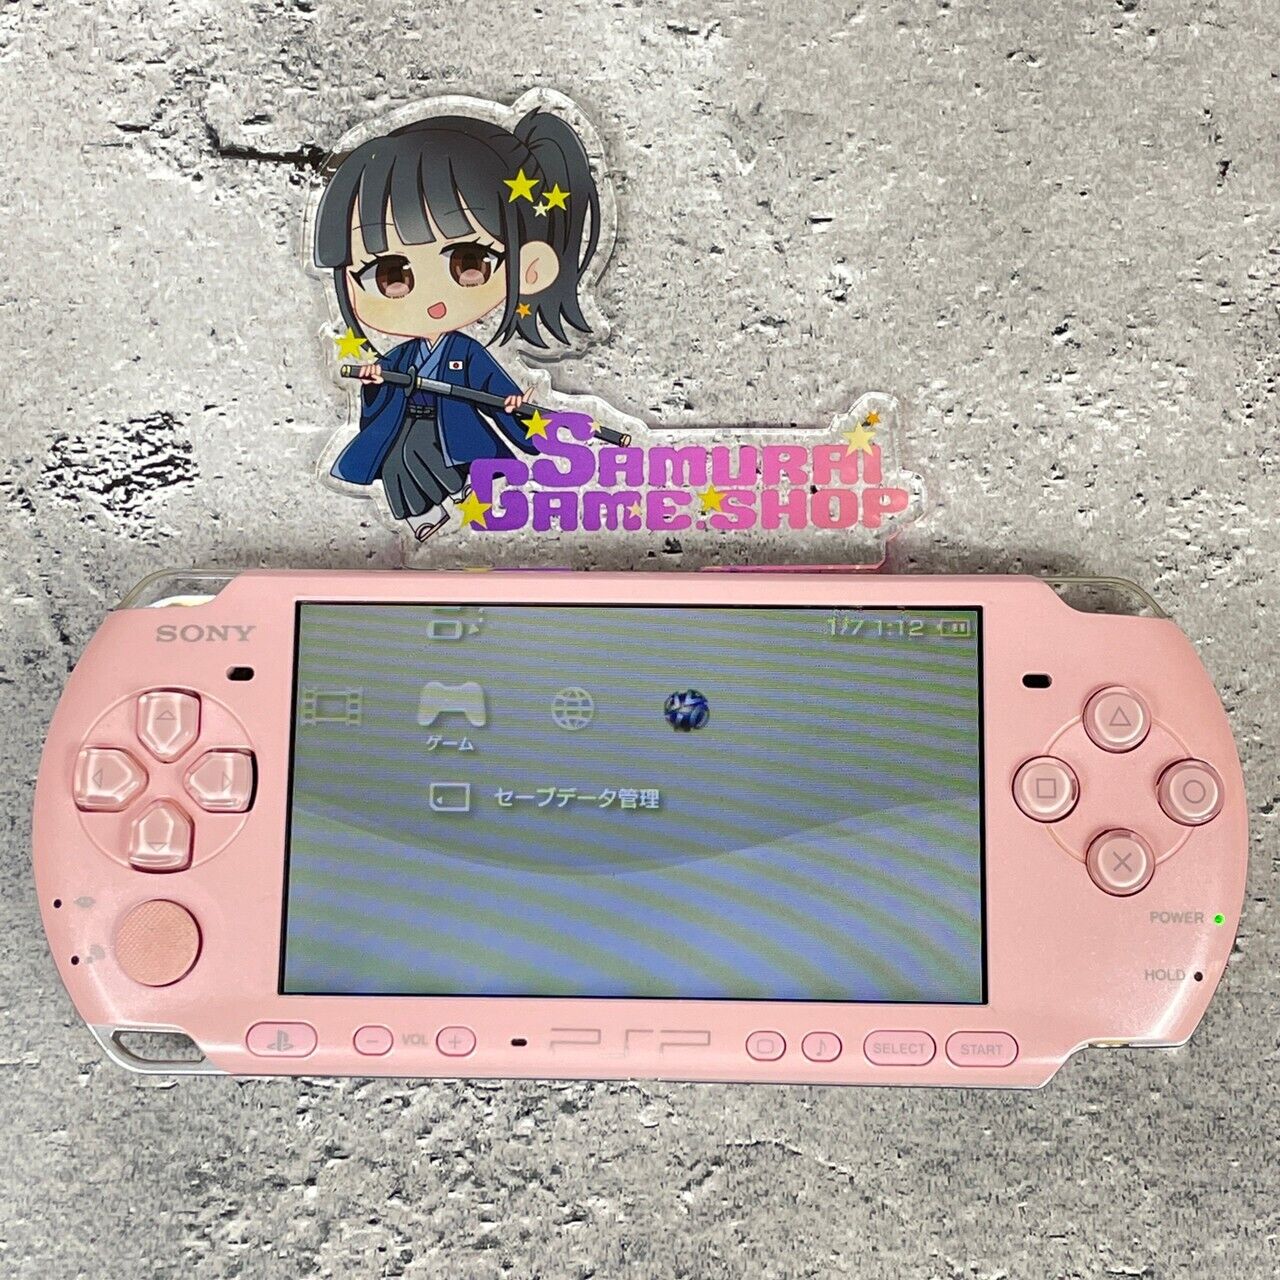 Sony Playstation Portable PSP 2000 Pink Used 